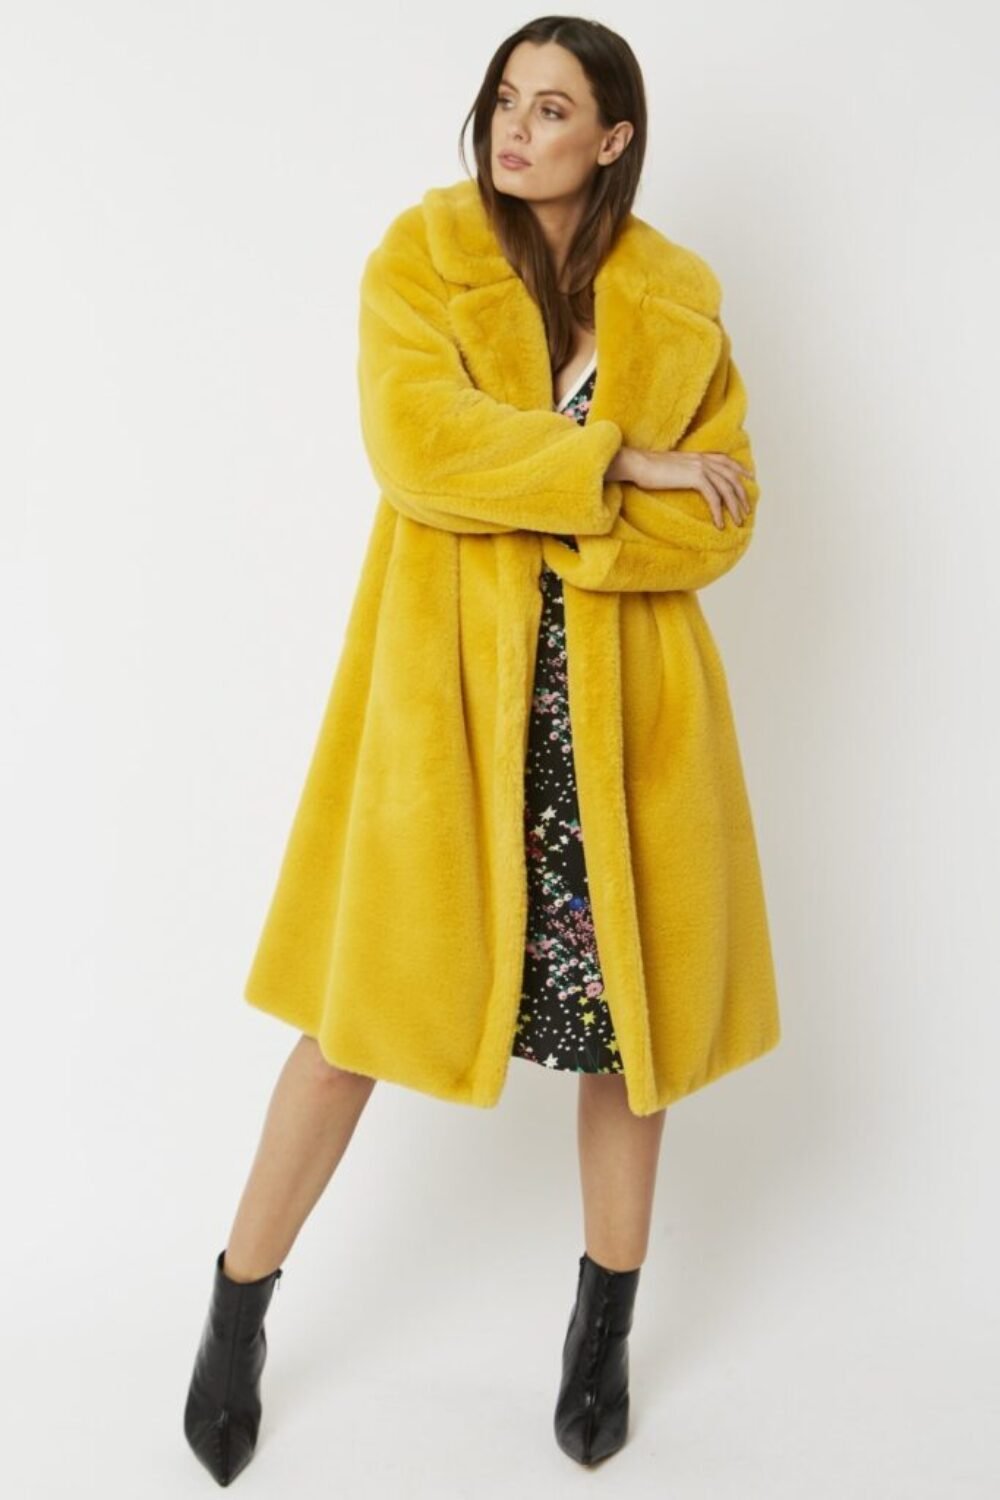 Shop Lux Yellow Faux Fur Midi Shaved Shearling Coat and women's luxury and designer clothes at www.lux-apparel.co.uk